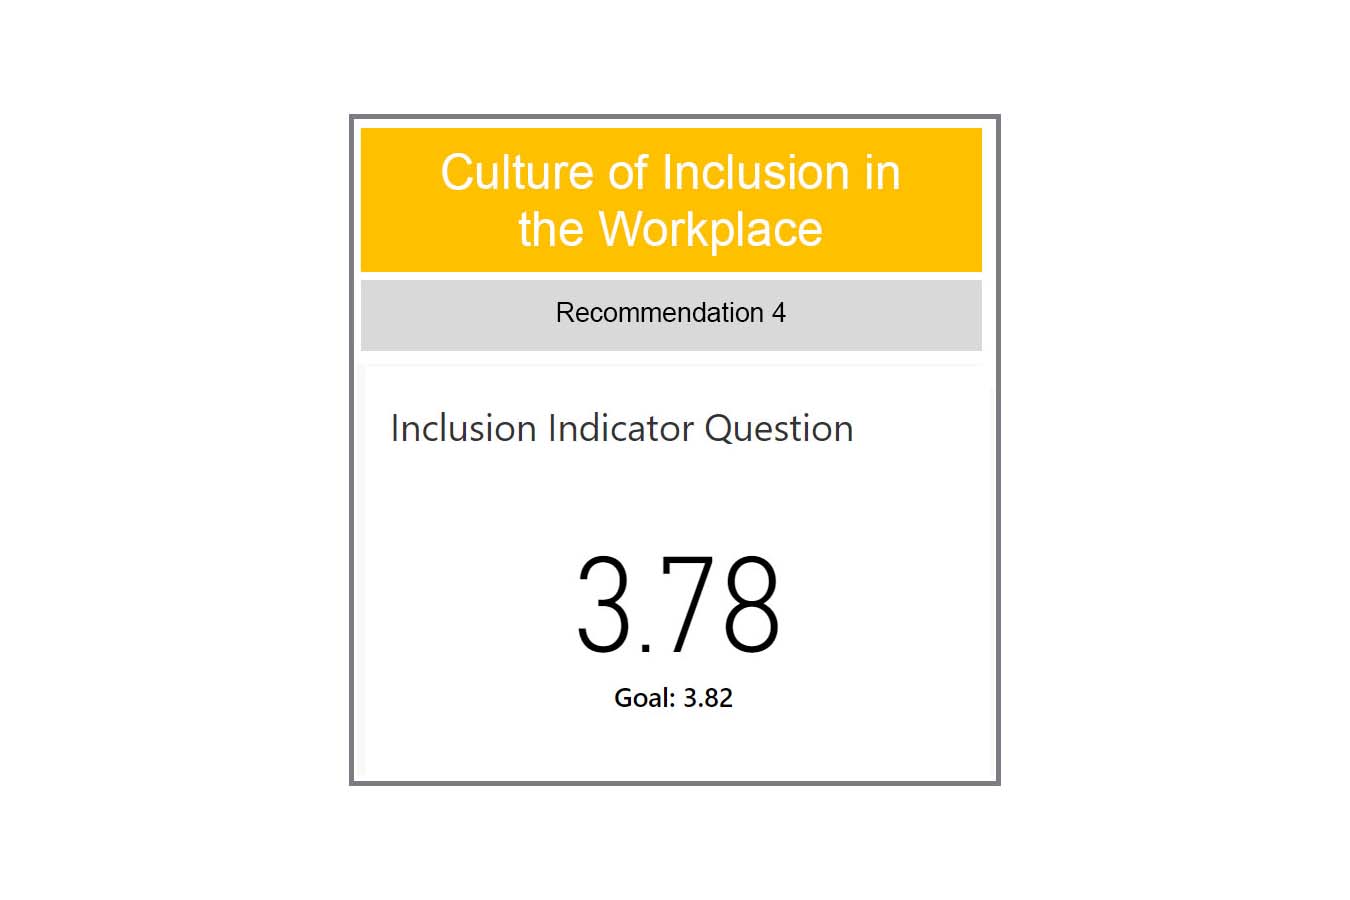 Culture of inclusion in the workplace recommendation 4 